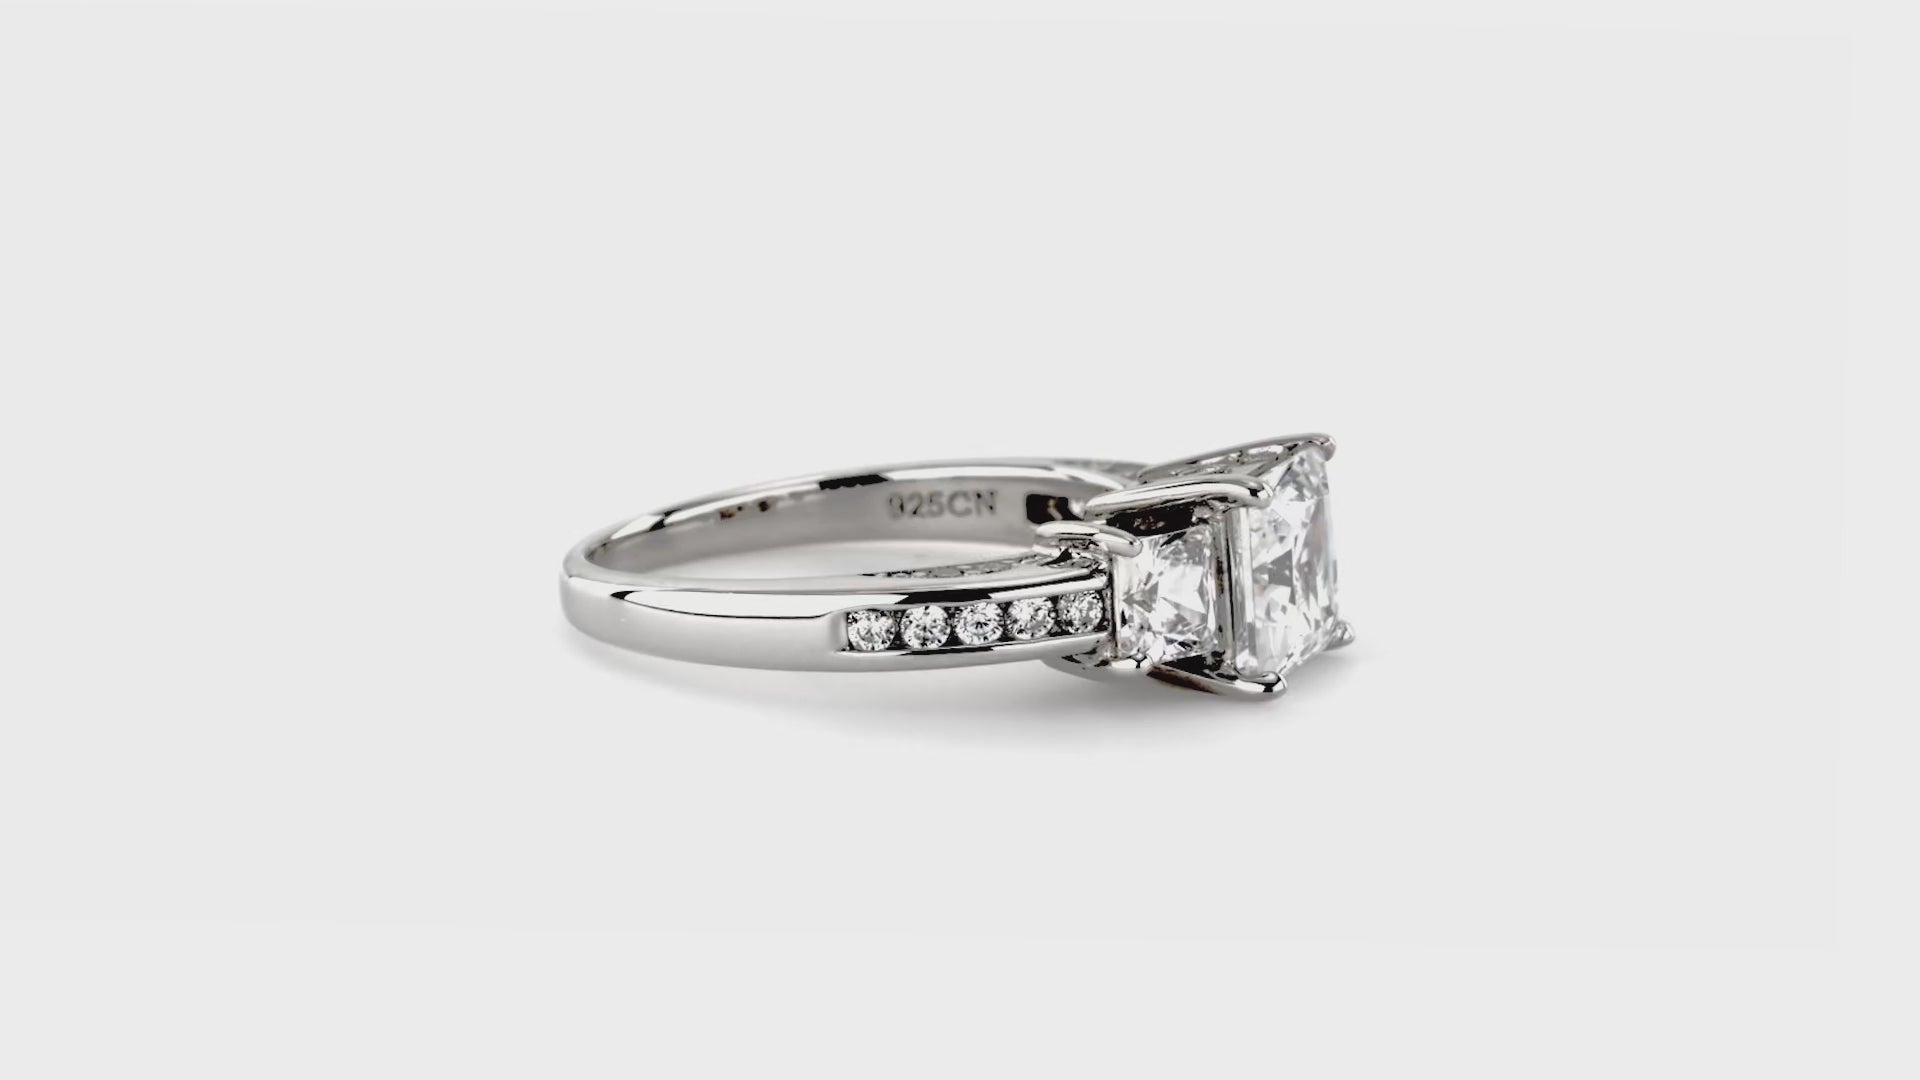 Video Contains 3-Stone Princess CZ Ring in Sterling Silver. Style Number R686